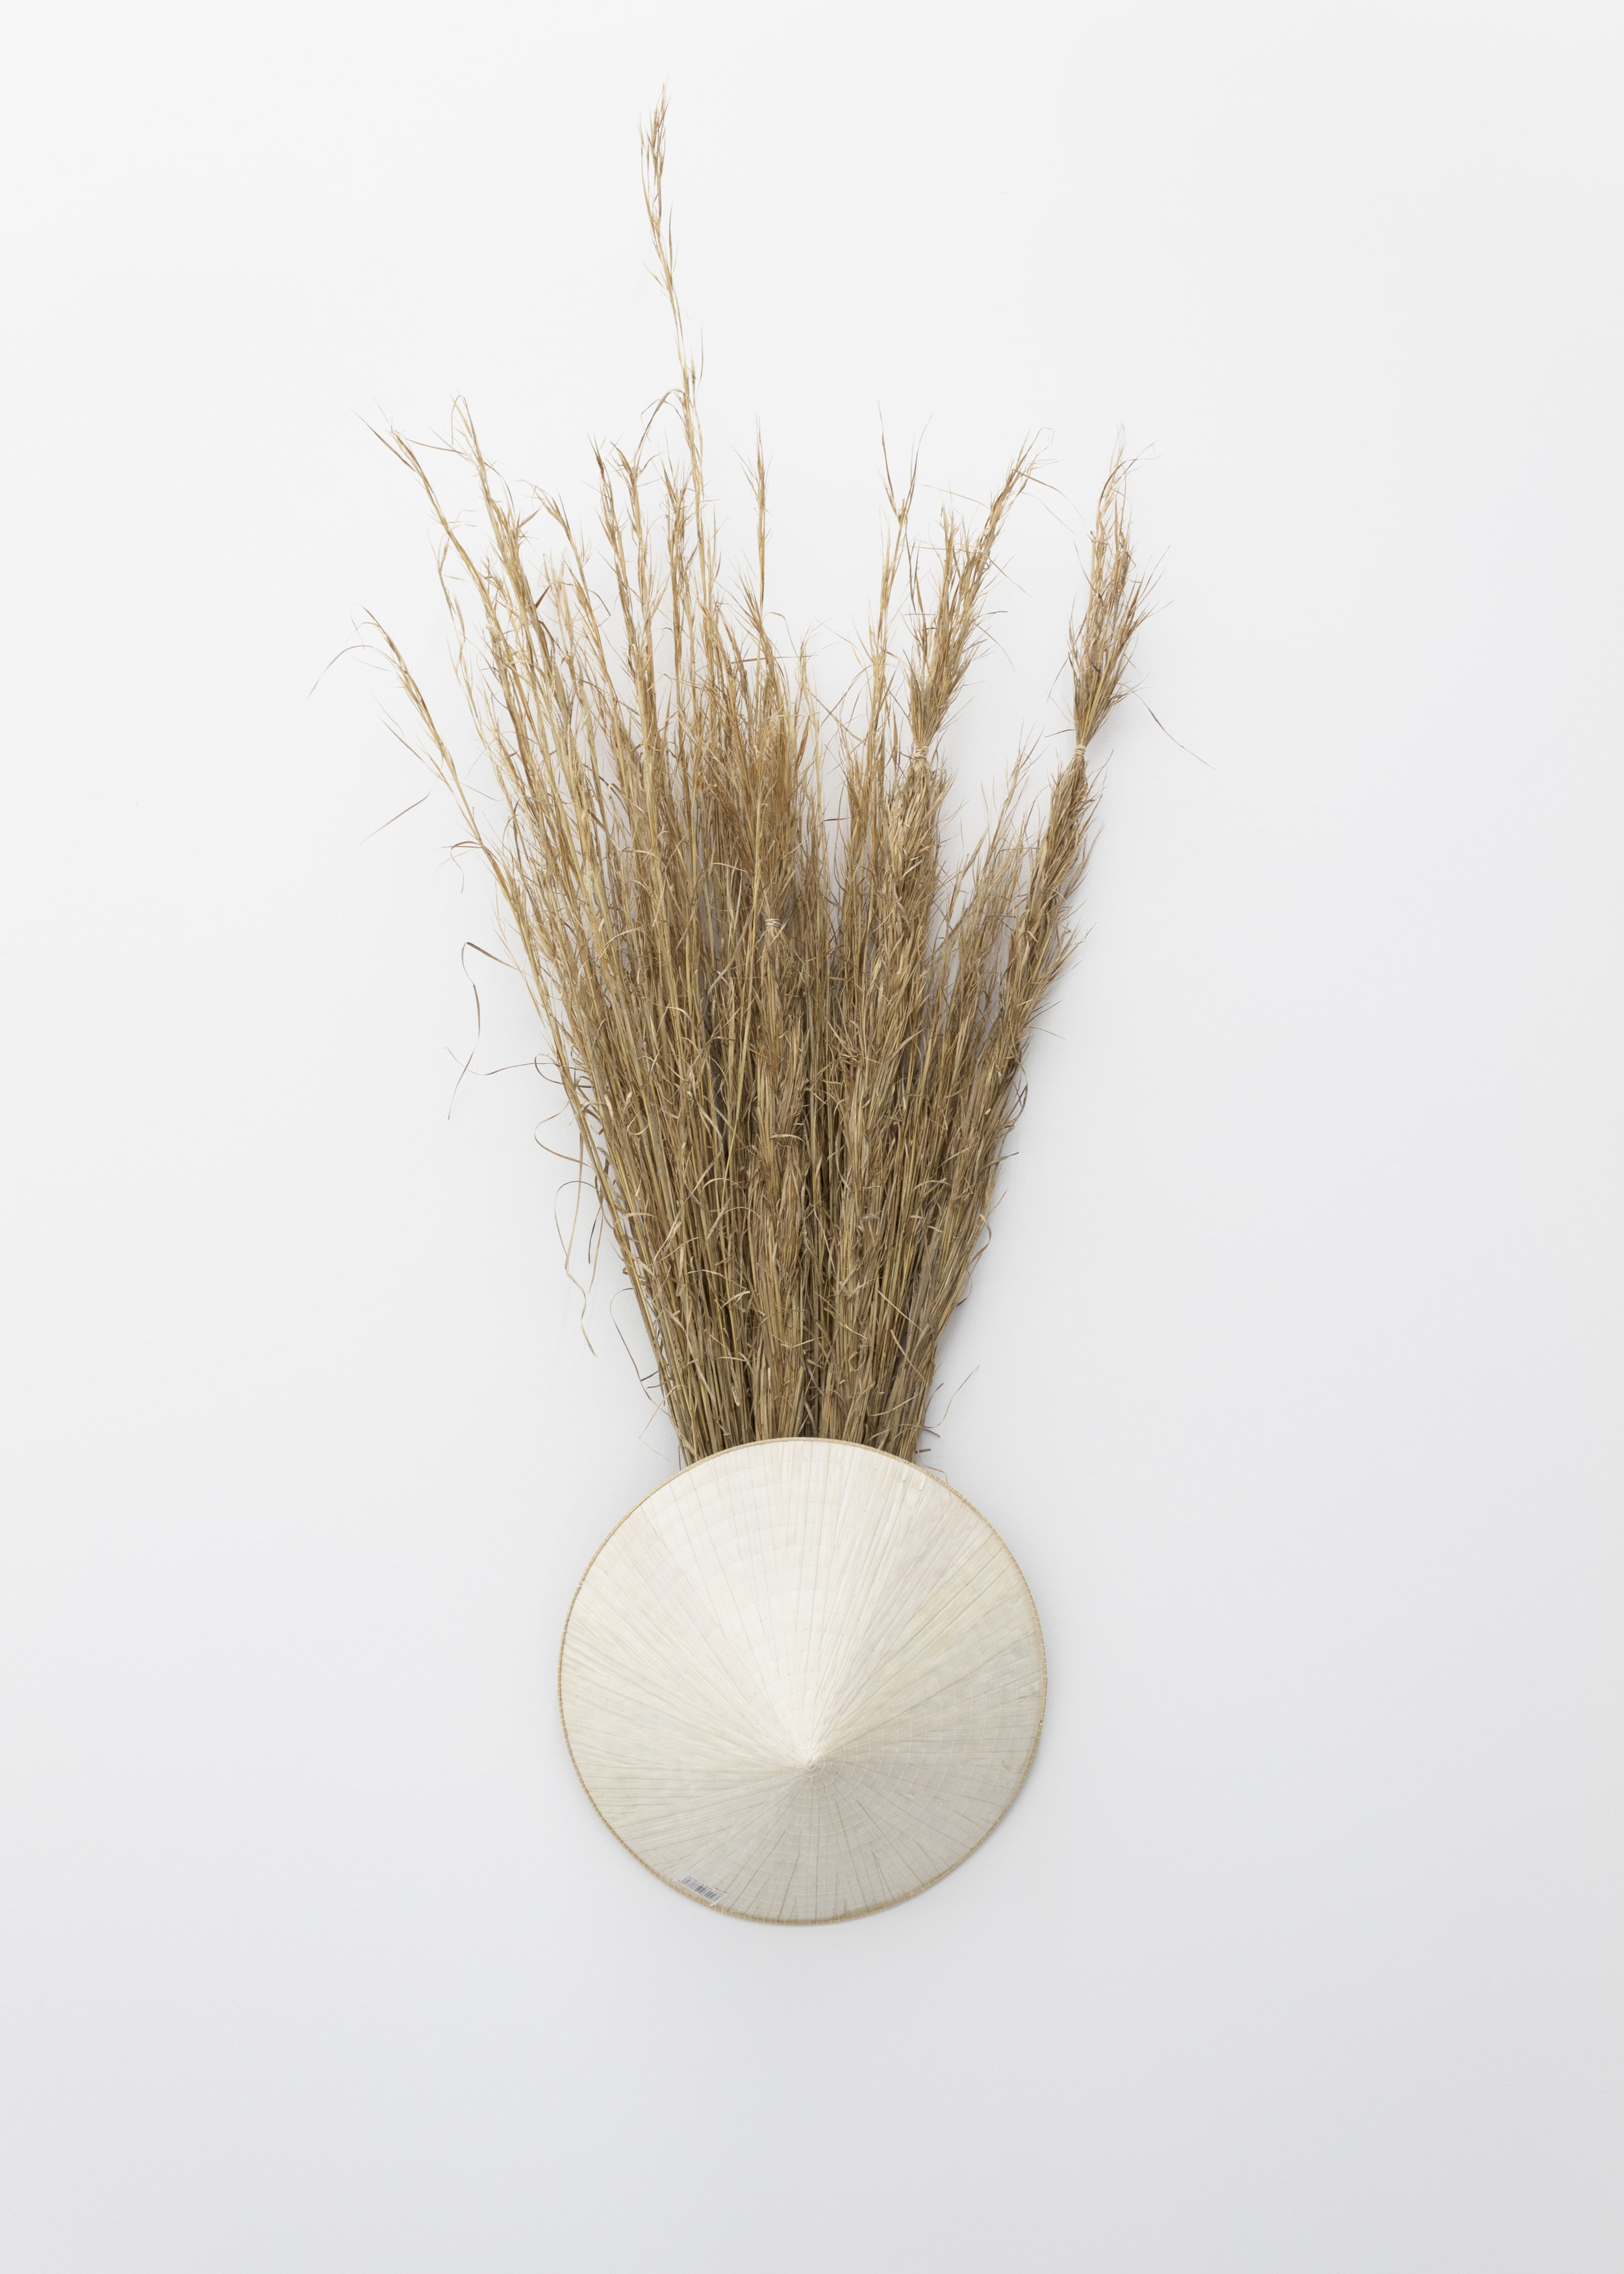  Millian Giang Lien Pham,  Preforge: 9 Stages (Nine) , 2019. Grass, conical hat 